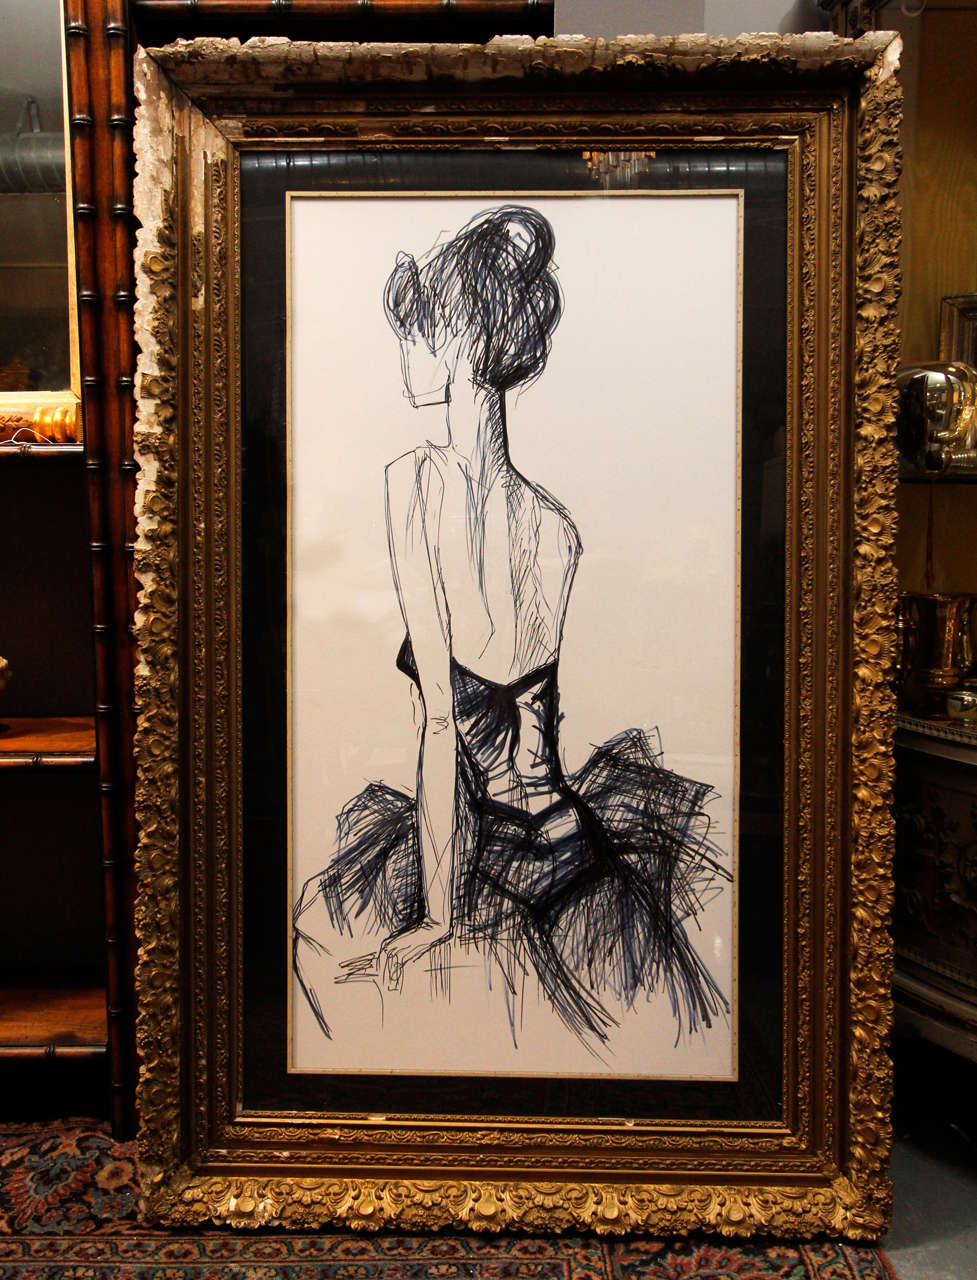 Beautiful oversize sketch in black and indigo of woman in evening gown in antique frame.